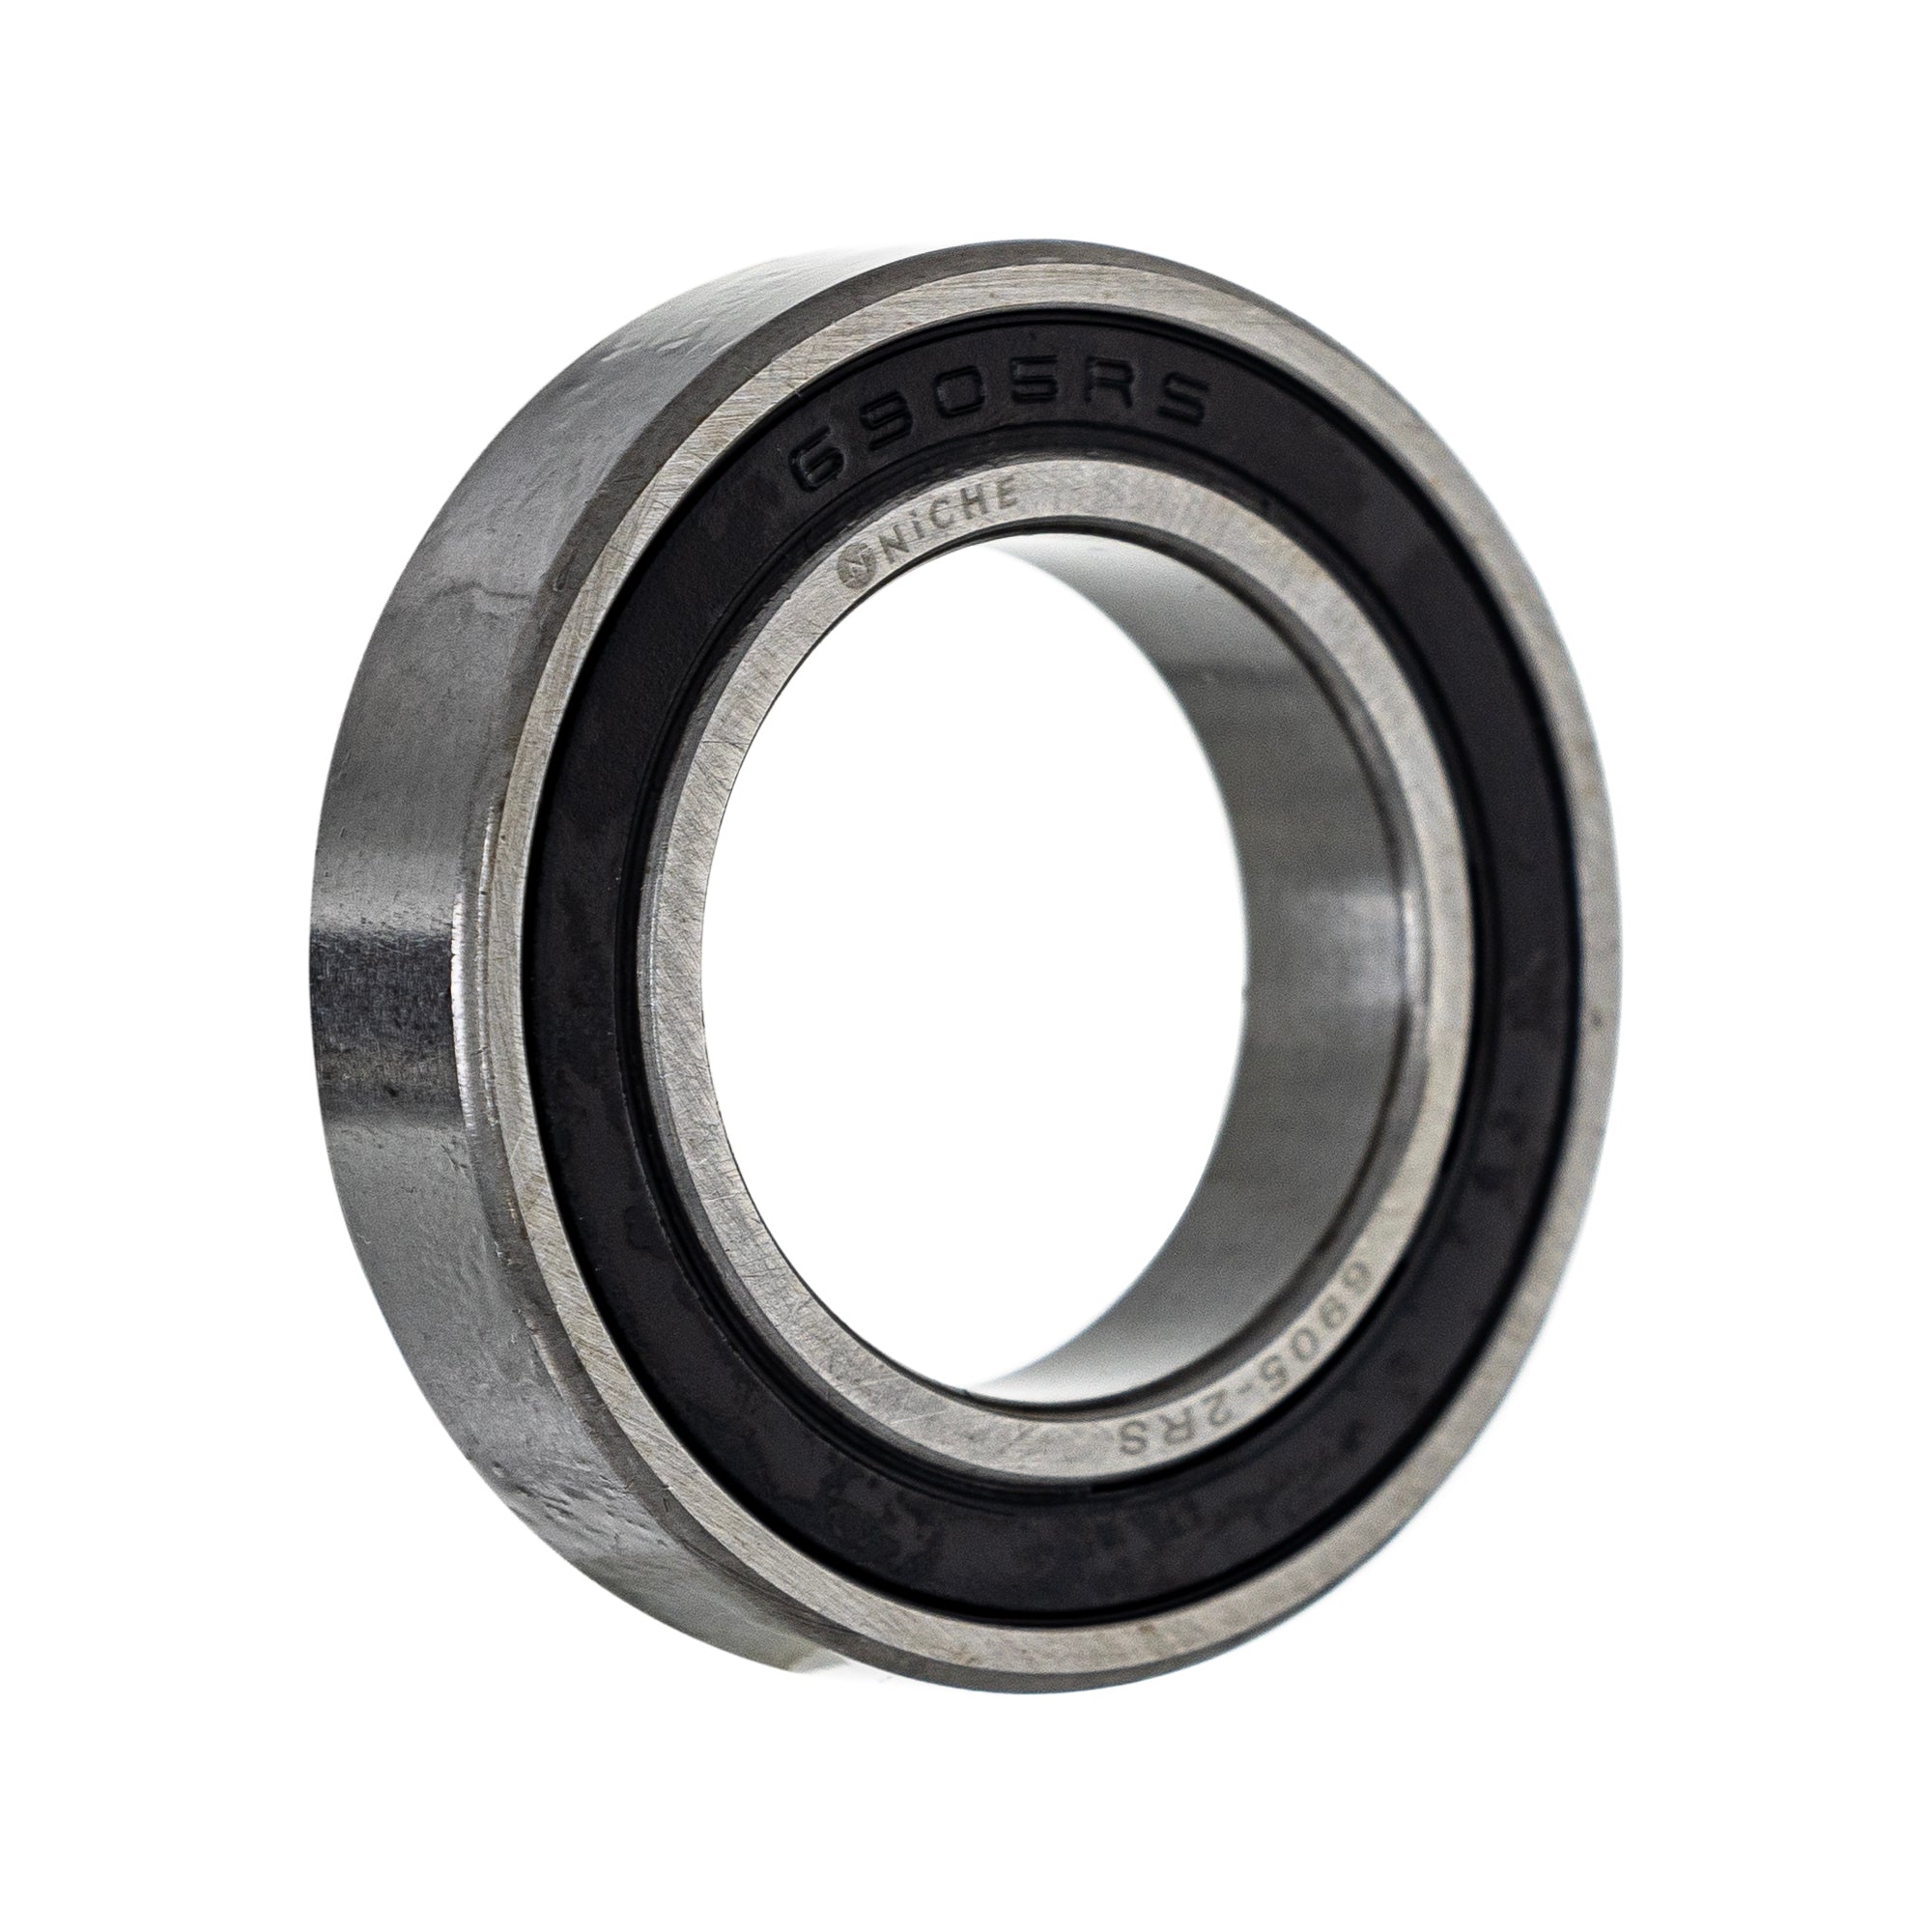 NICHE MK1009222 Bearing & Seal Kit for zOTHER YZ450F YZ250FX